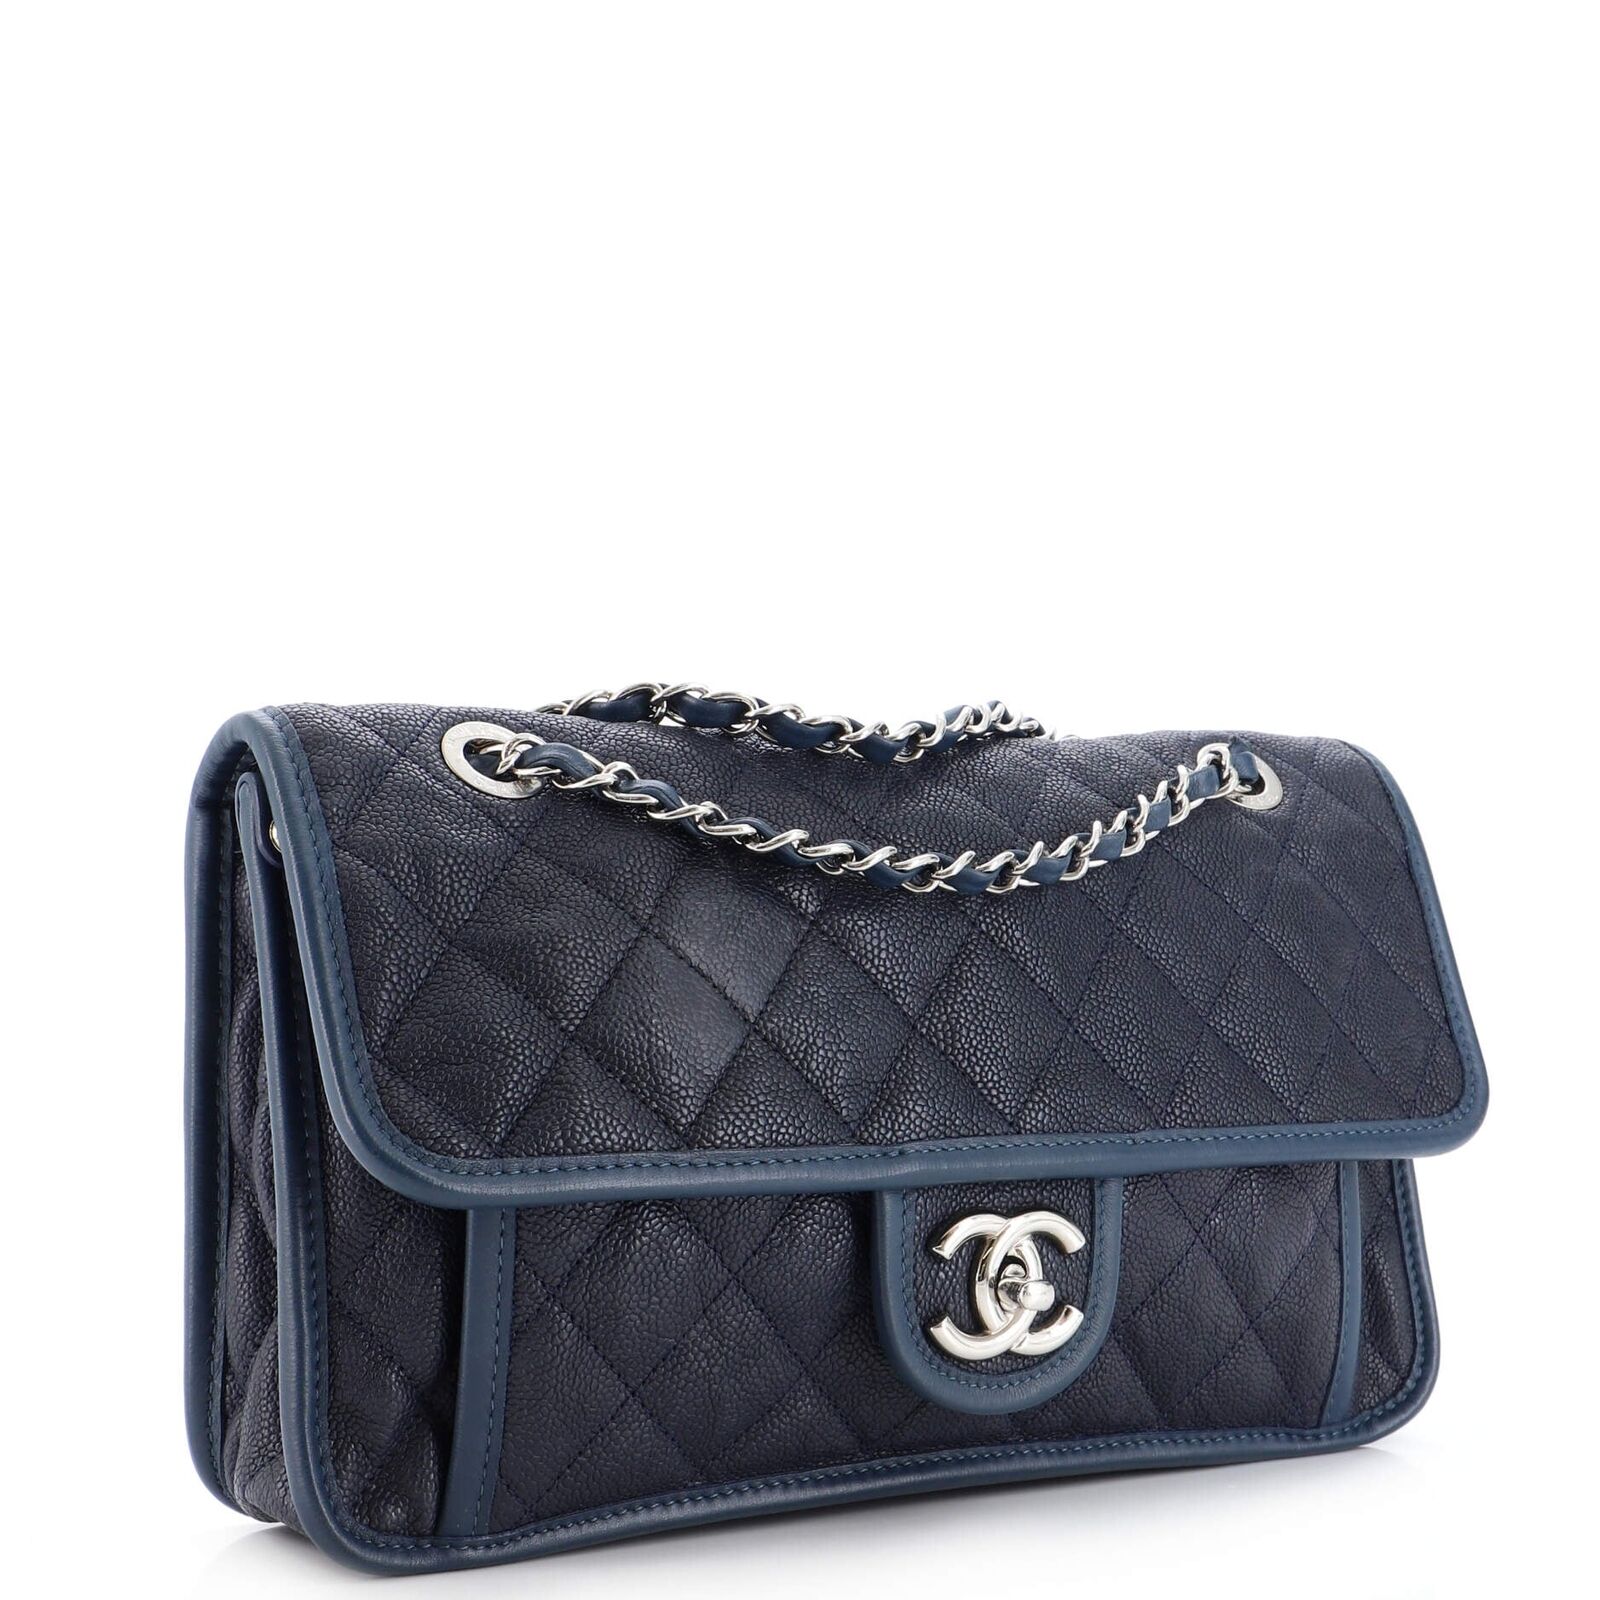 Chanel Dark White Quilted Caviar Leather French Riviera Medium